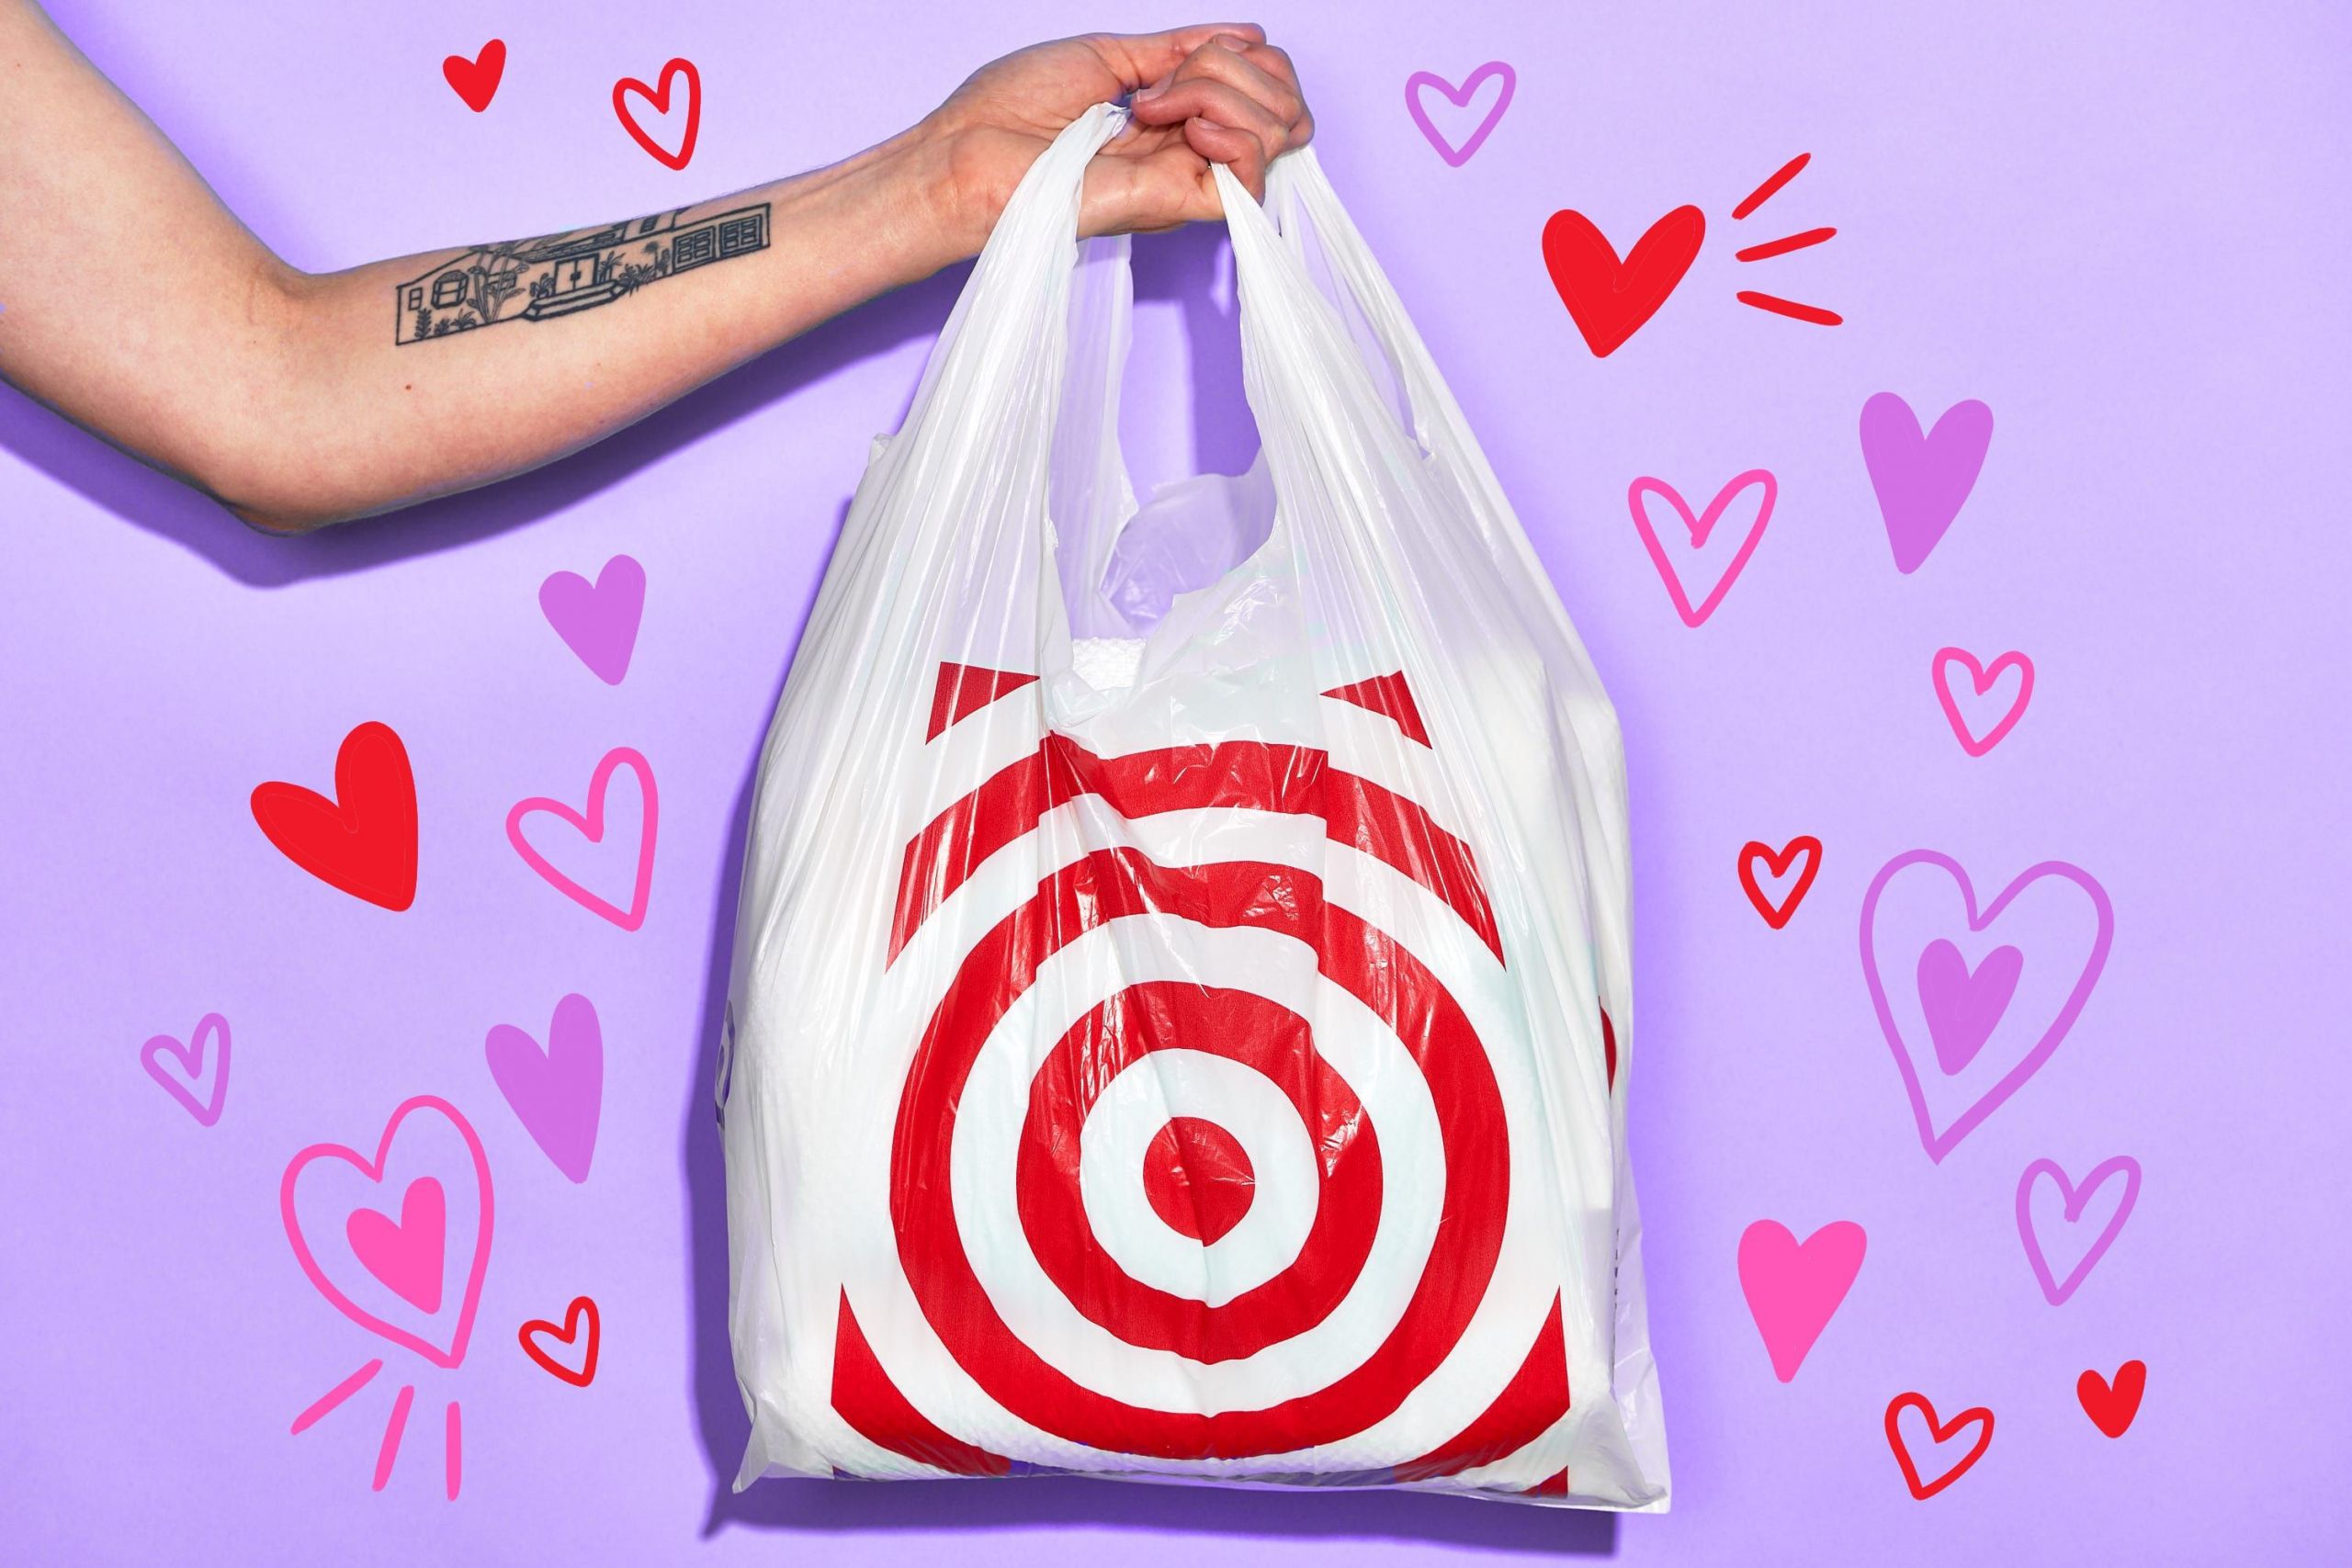 Valentine Day Gift Ideas Target
 The 10 Best Valentine’s Day Gifts at Tar for $15 or